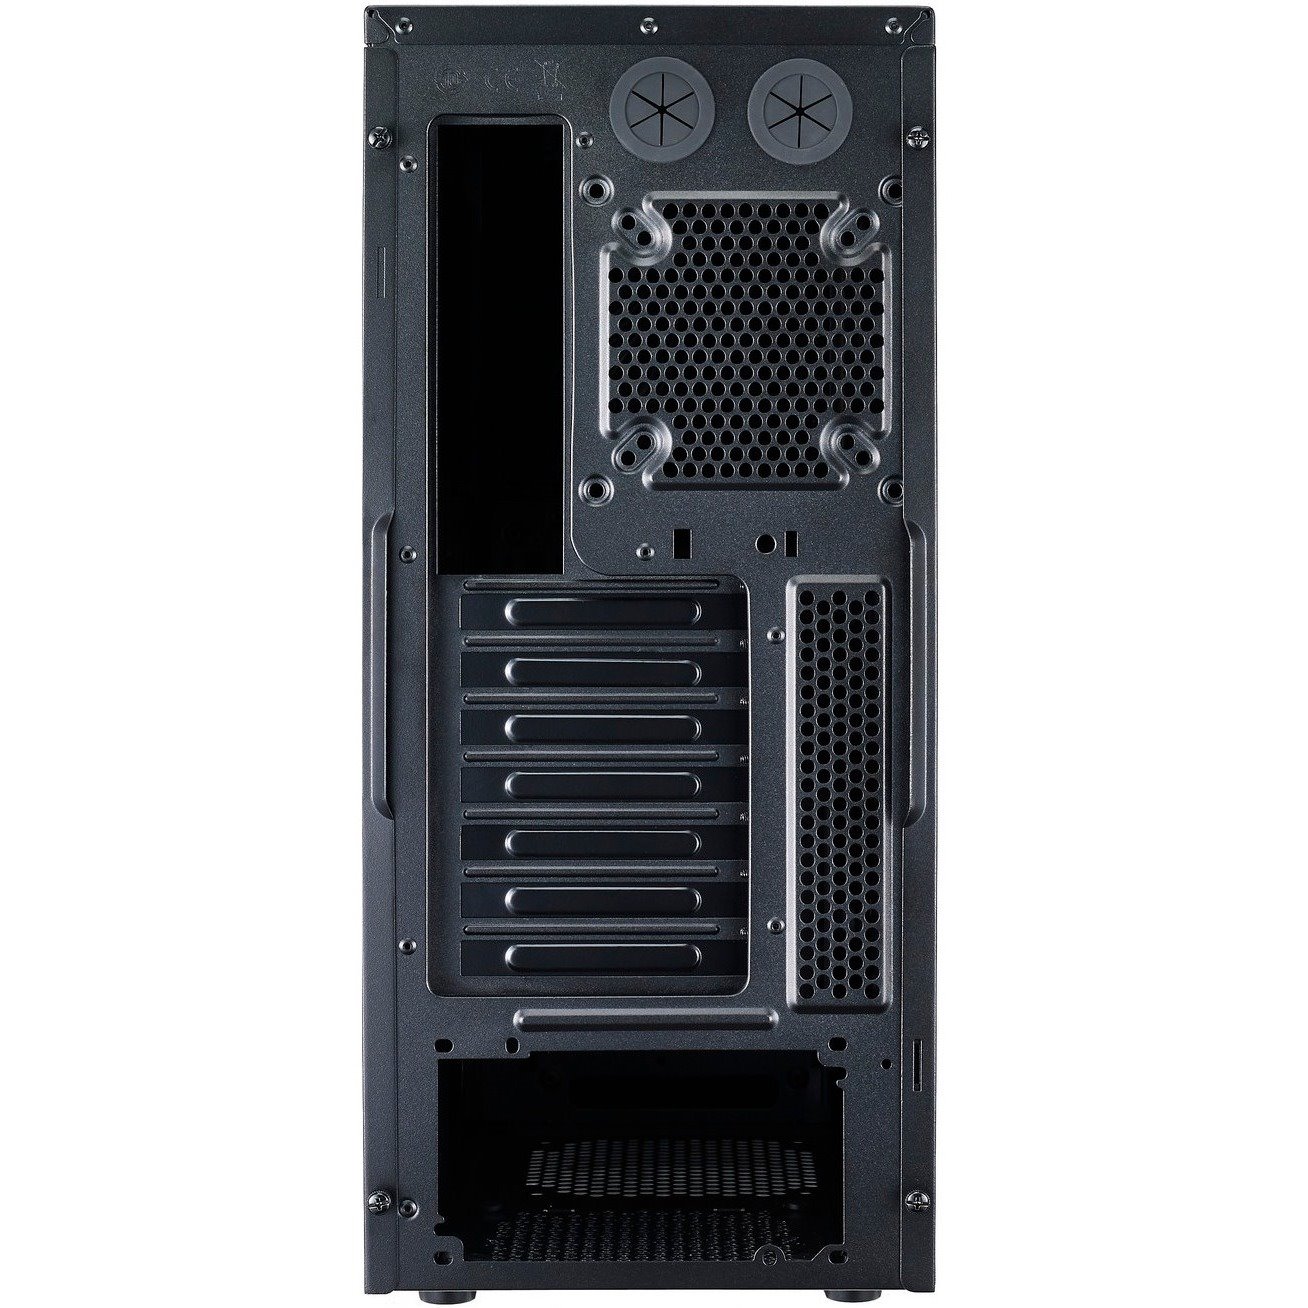 Buy Cooler Master Cm 590 Iii Rc 593 Kwn2 Computer Case Atx Micro Atx Mini Itx Motherboard Supported Mid Tower Steel Plastic Mesh Black Managed Services Australia Technology Centre